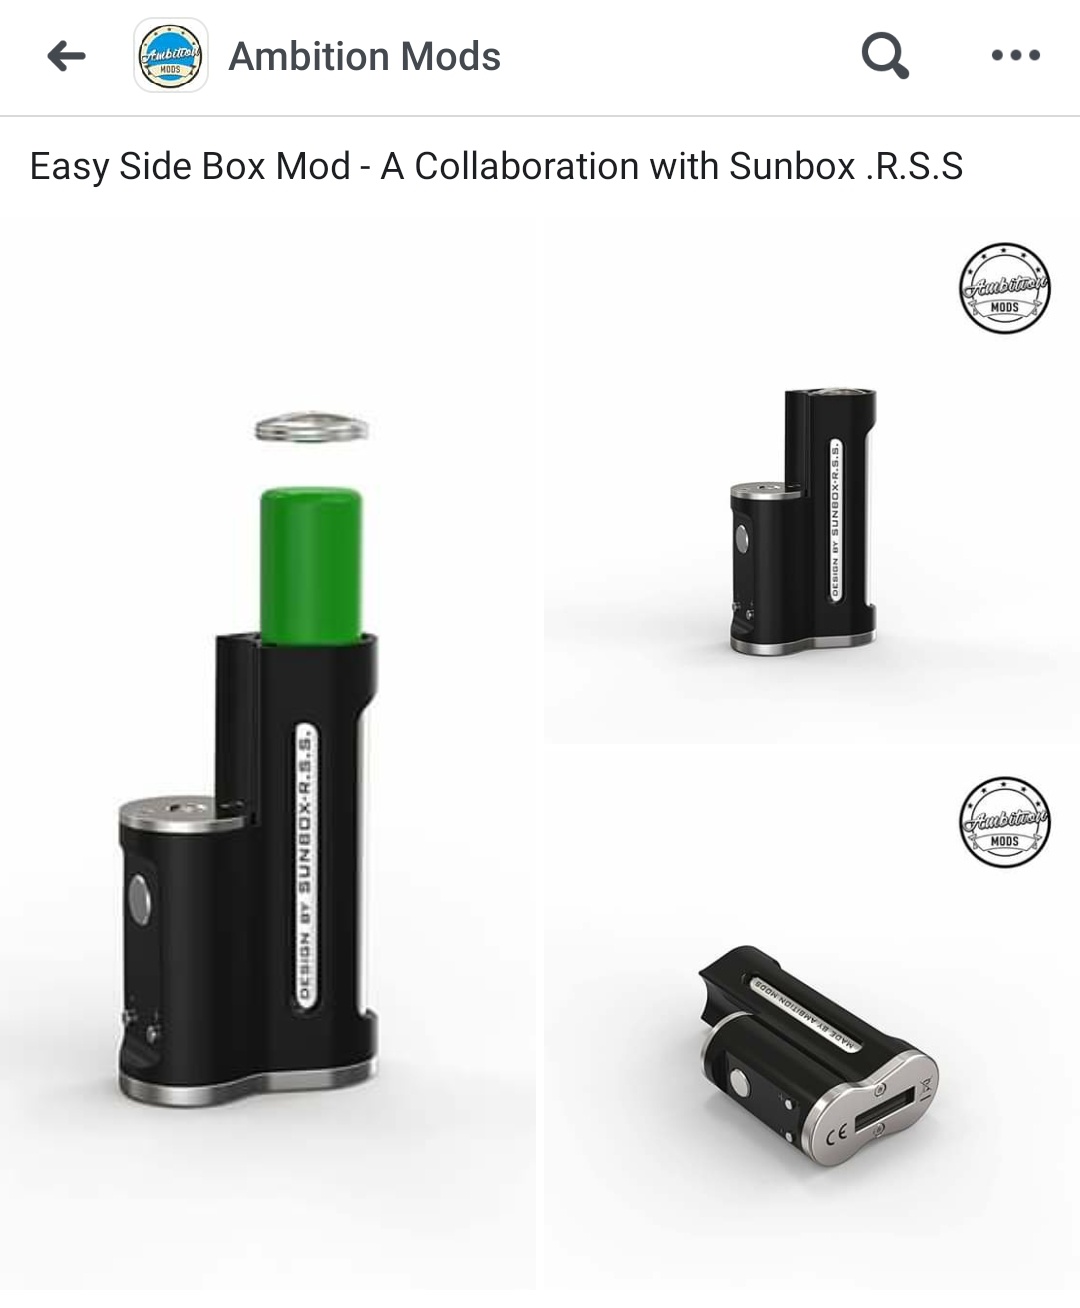 EASY SIDE Box Mod Stealth 60W Ambition Mods, Sunbox & R.S.S Mods